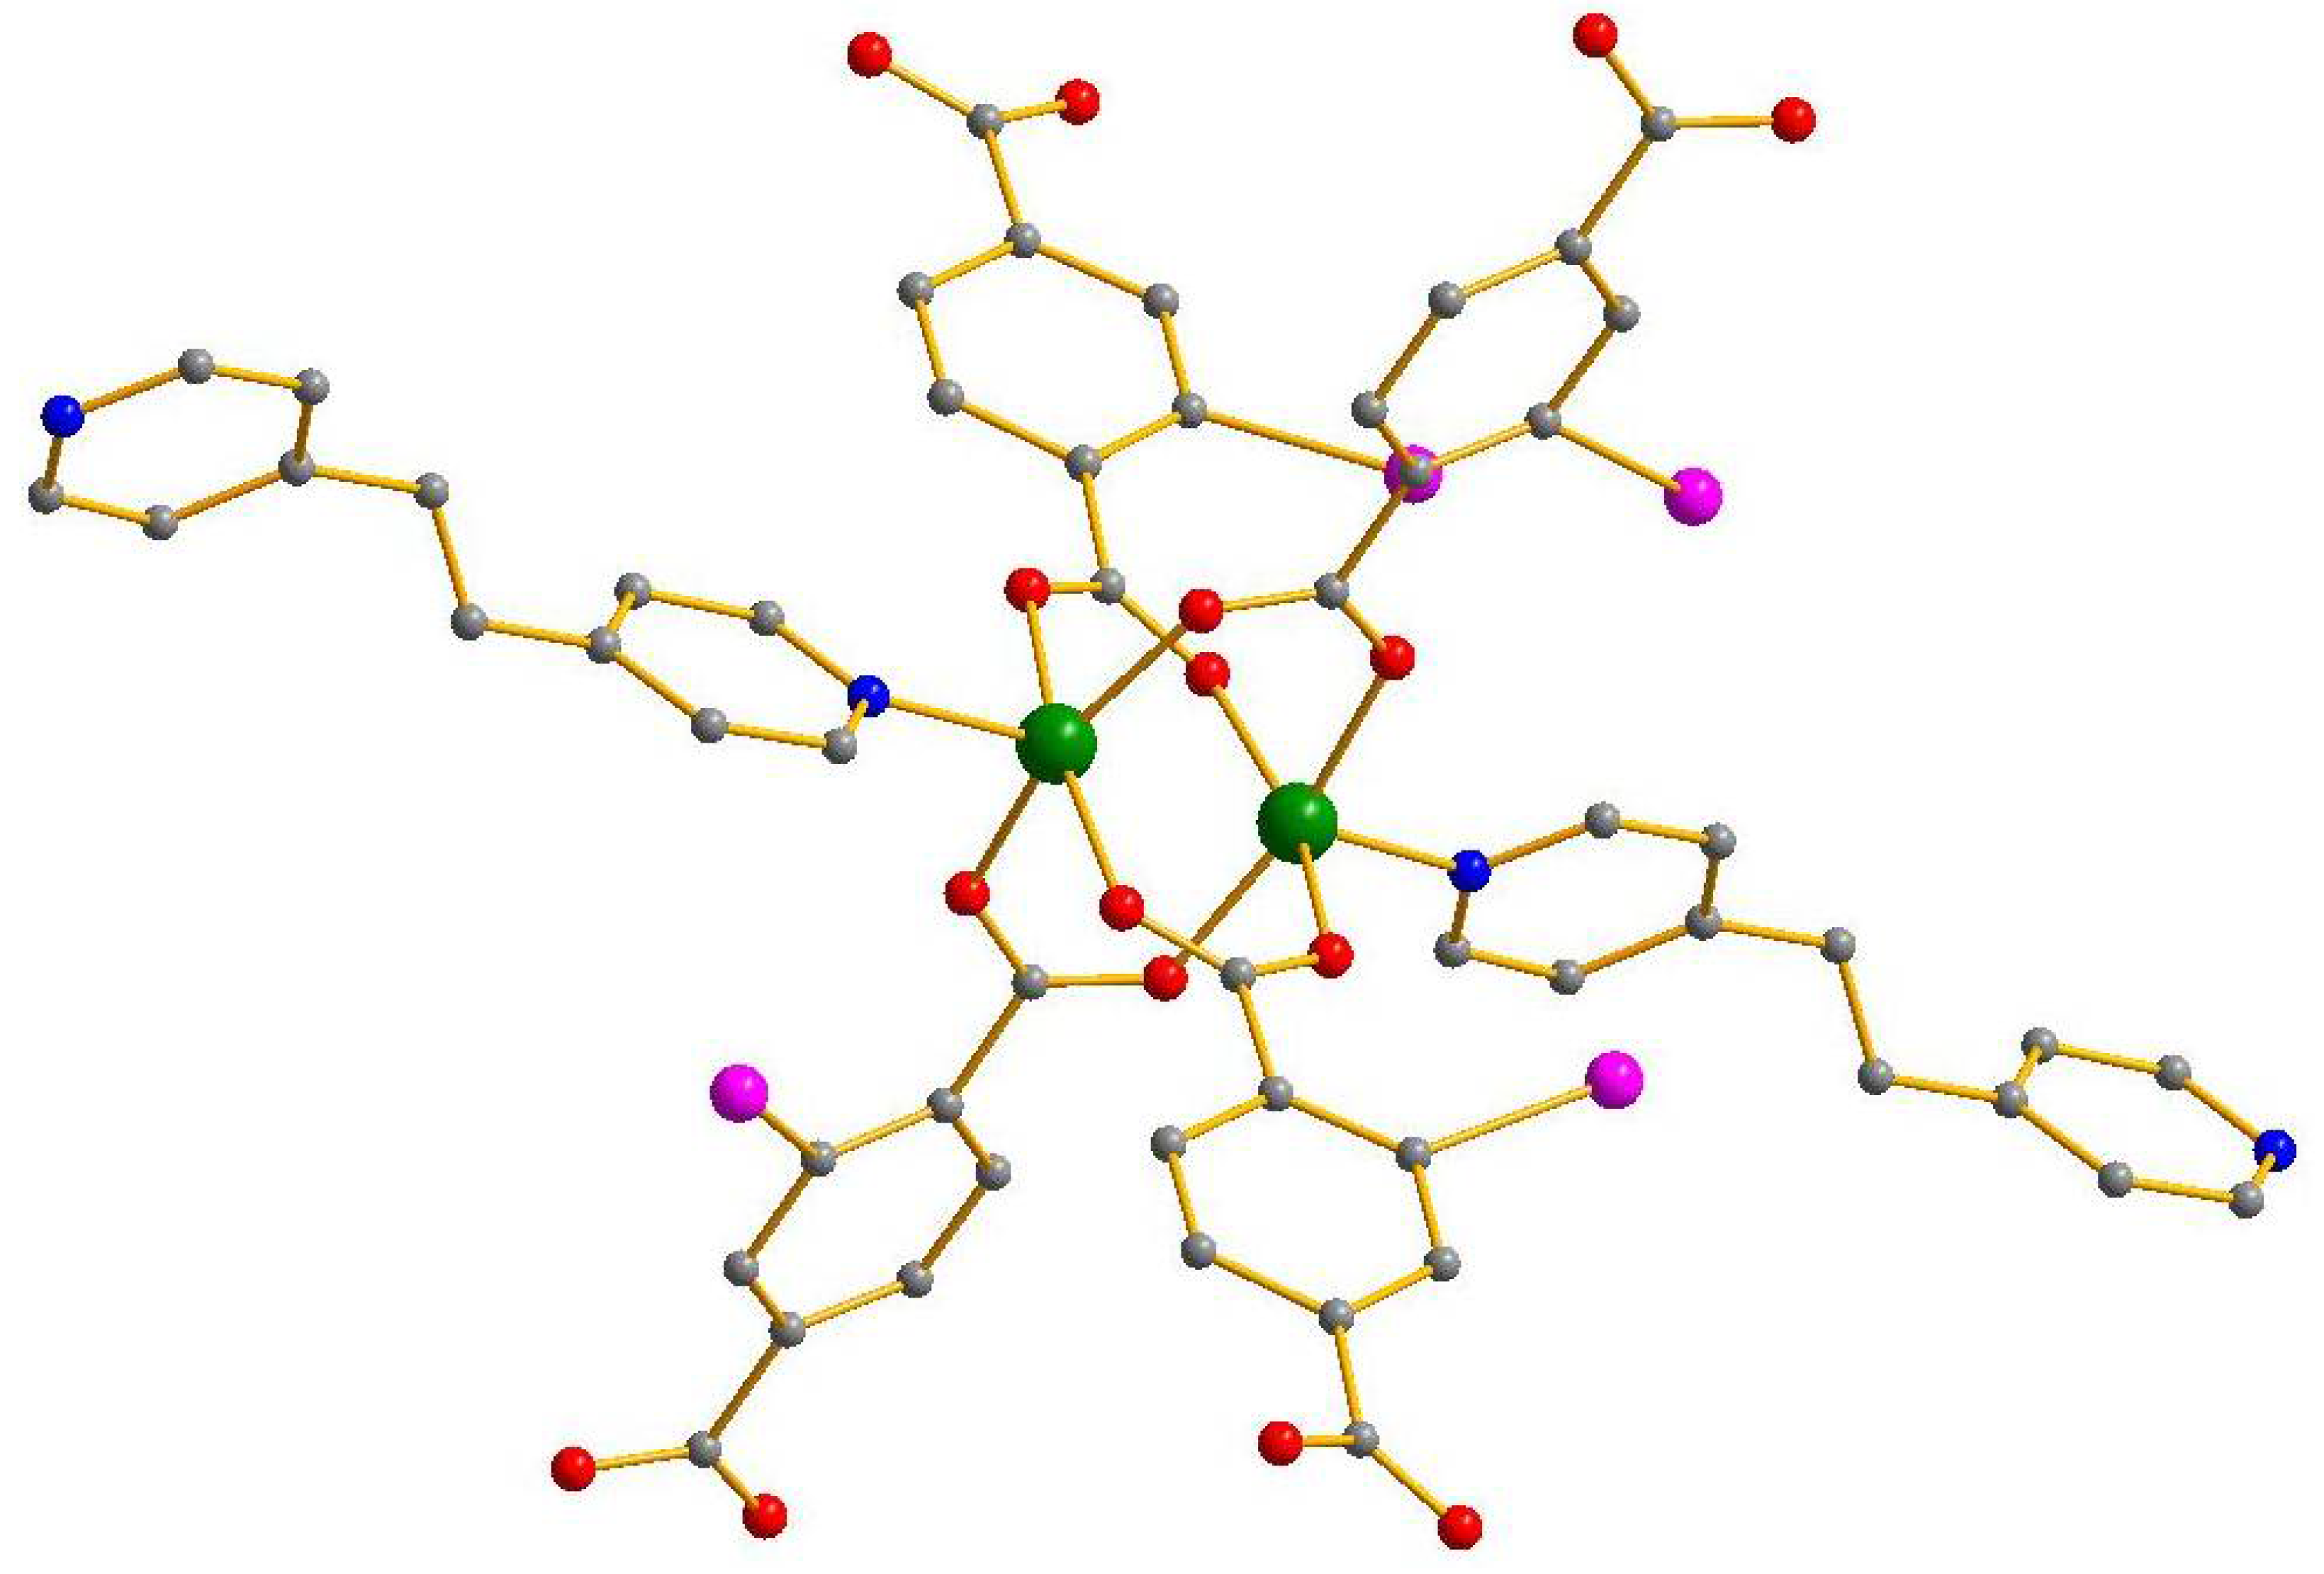 Molecules | Free Full-Text | Zn(II) and Co(II) 3D Coordination Polymers  Based on 2-Iodoterephtalic Acid and 1,2-bis(4-pyridyl)ethane: Structures  and Sorption Properties